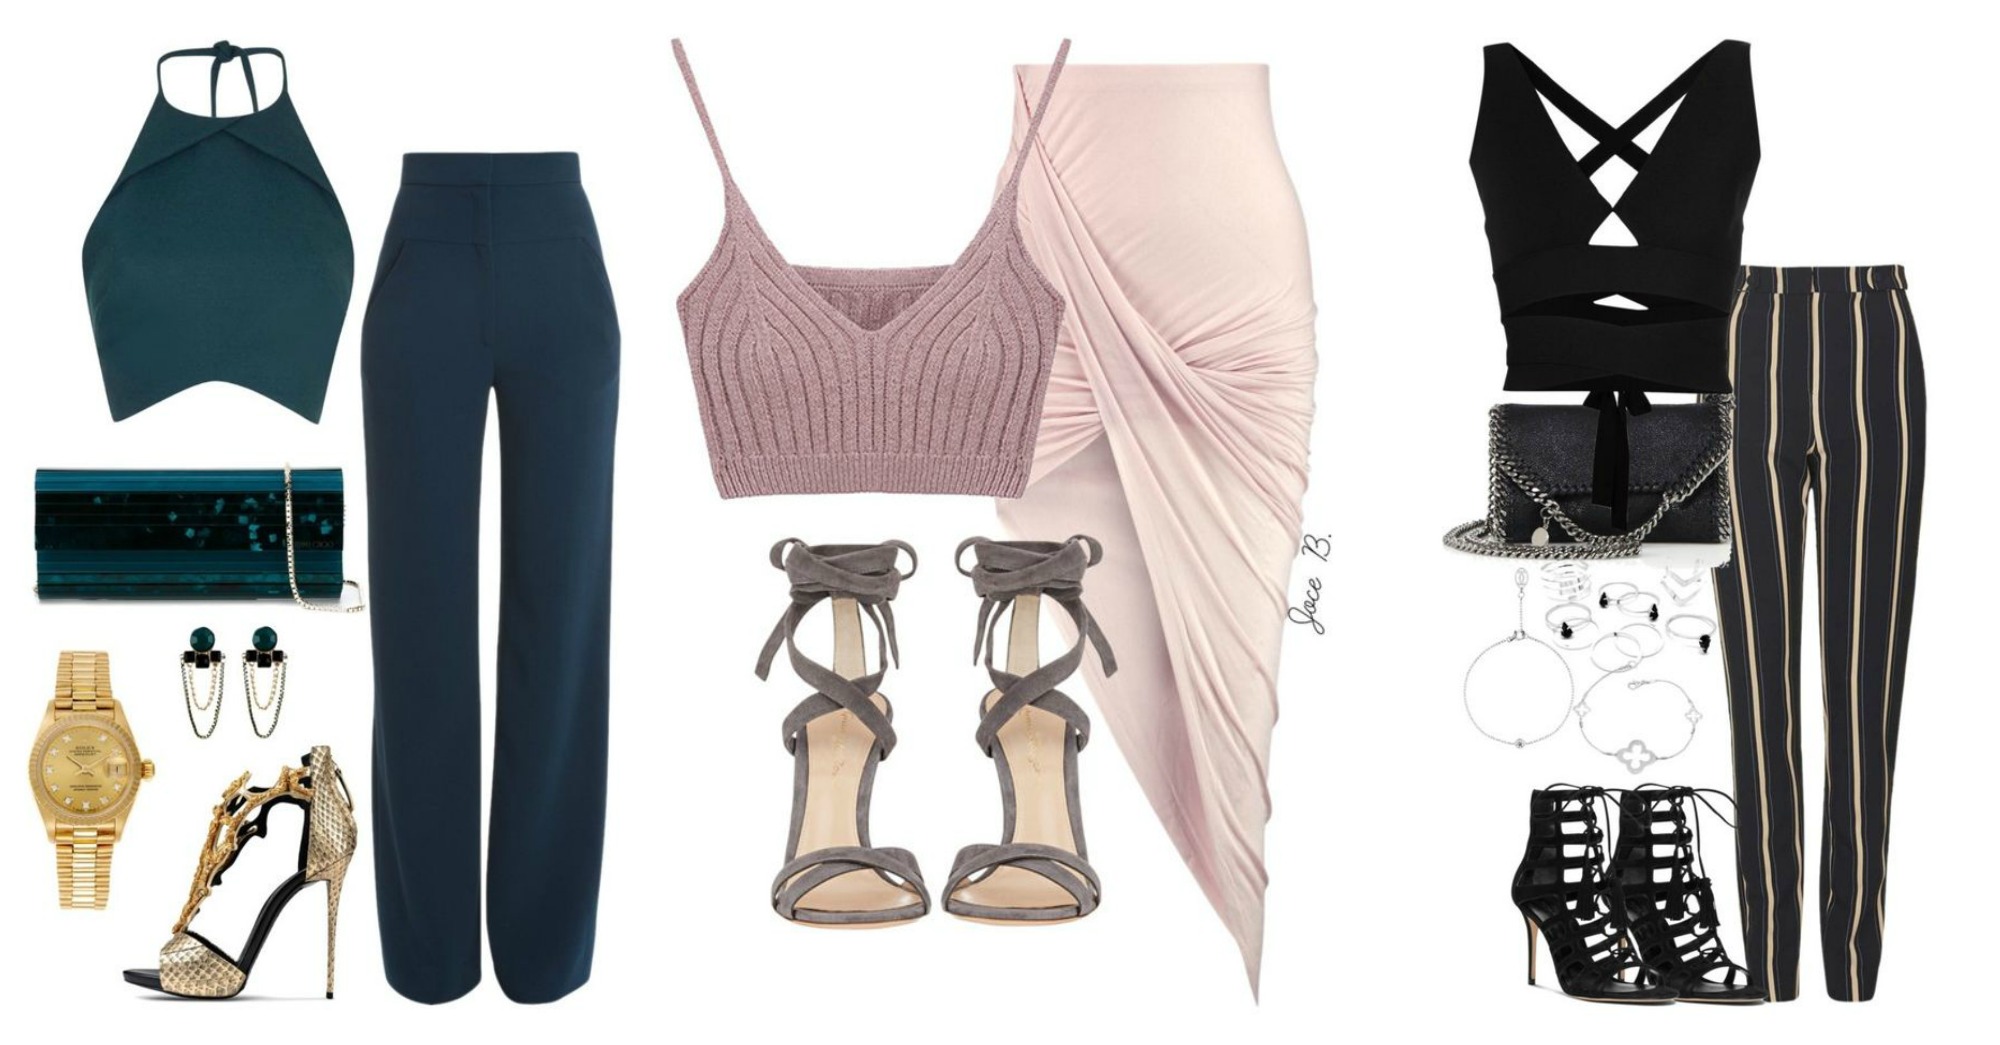 Stylish Night Out Polyvore Combos That Will Turn Heads For Sure ...